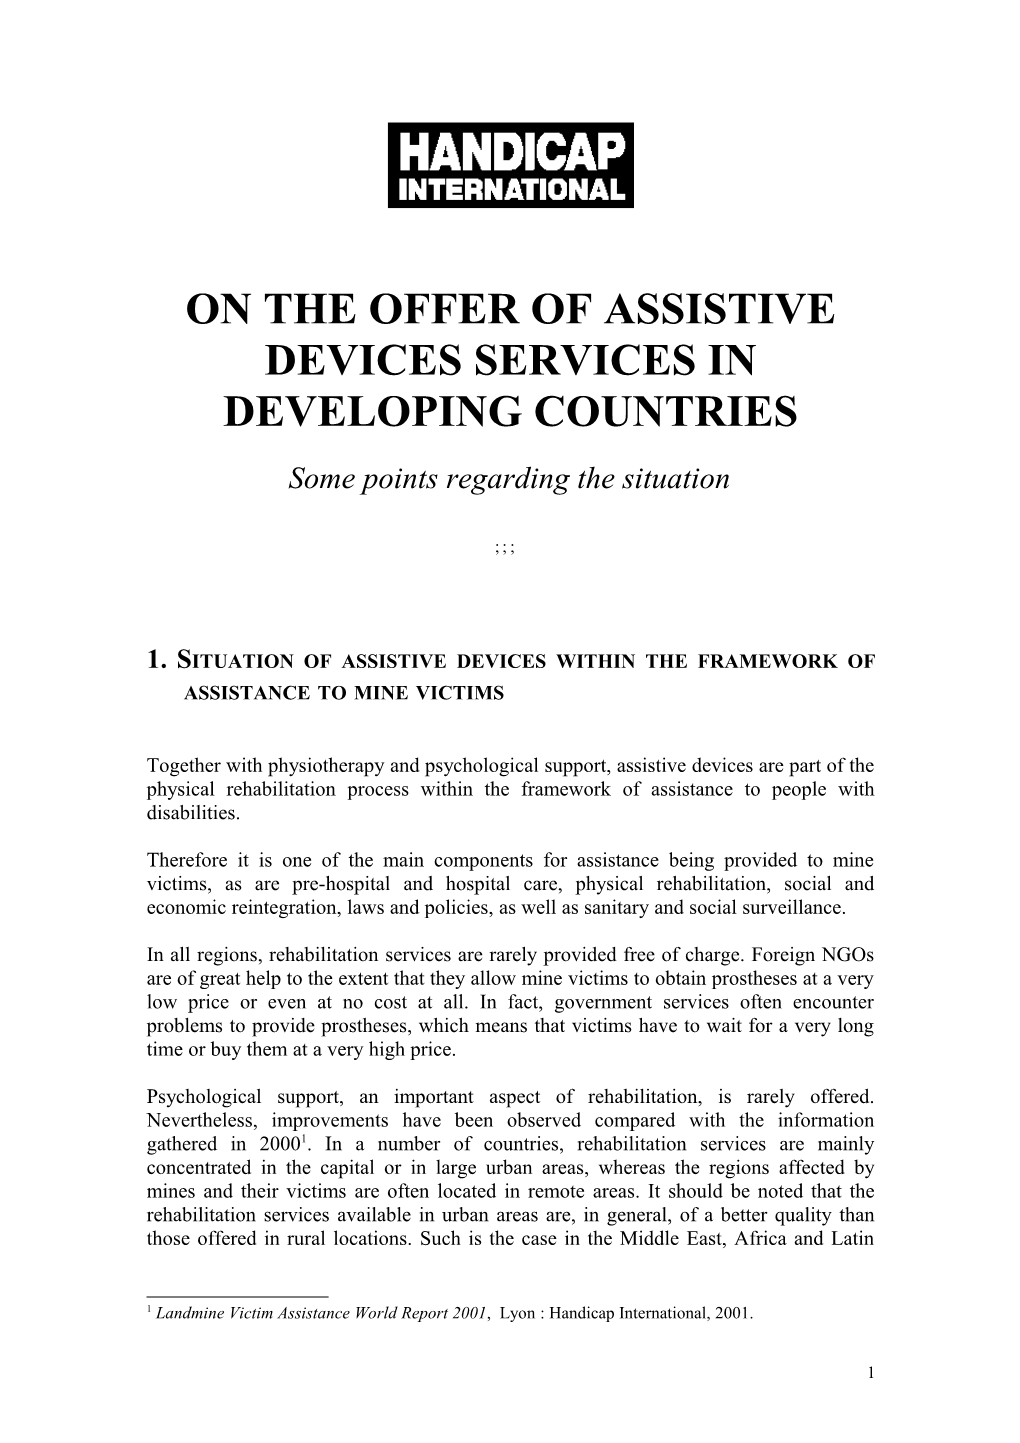 On the Offer of Appareillage Services in Developing Countries